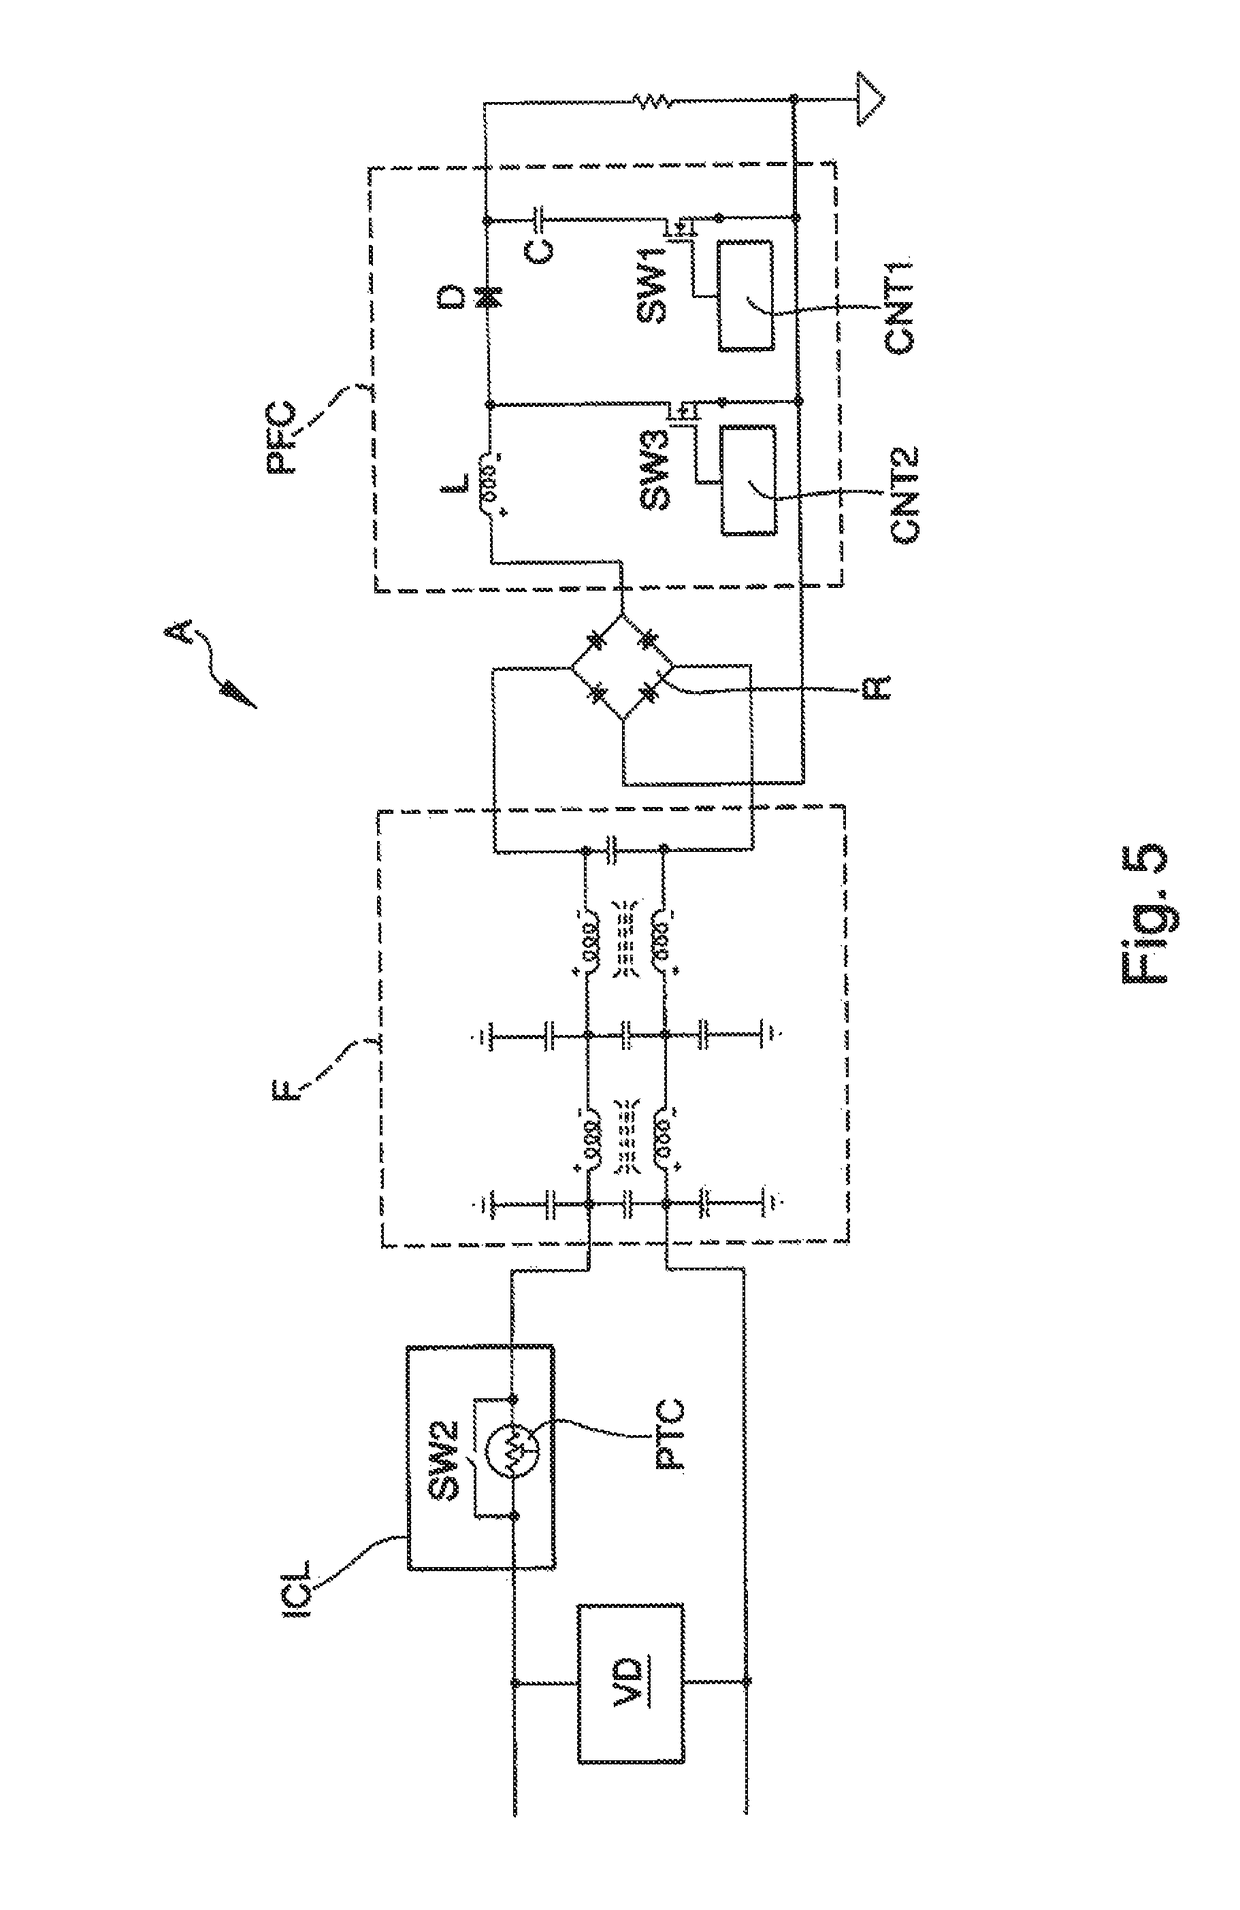 Power supply stage of an electric appliance, in particular a battery charger for charging batteries of electric vehicles